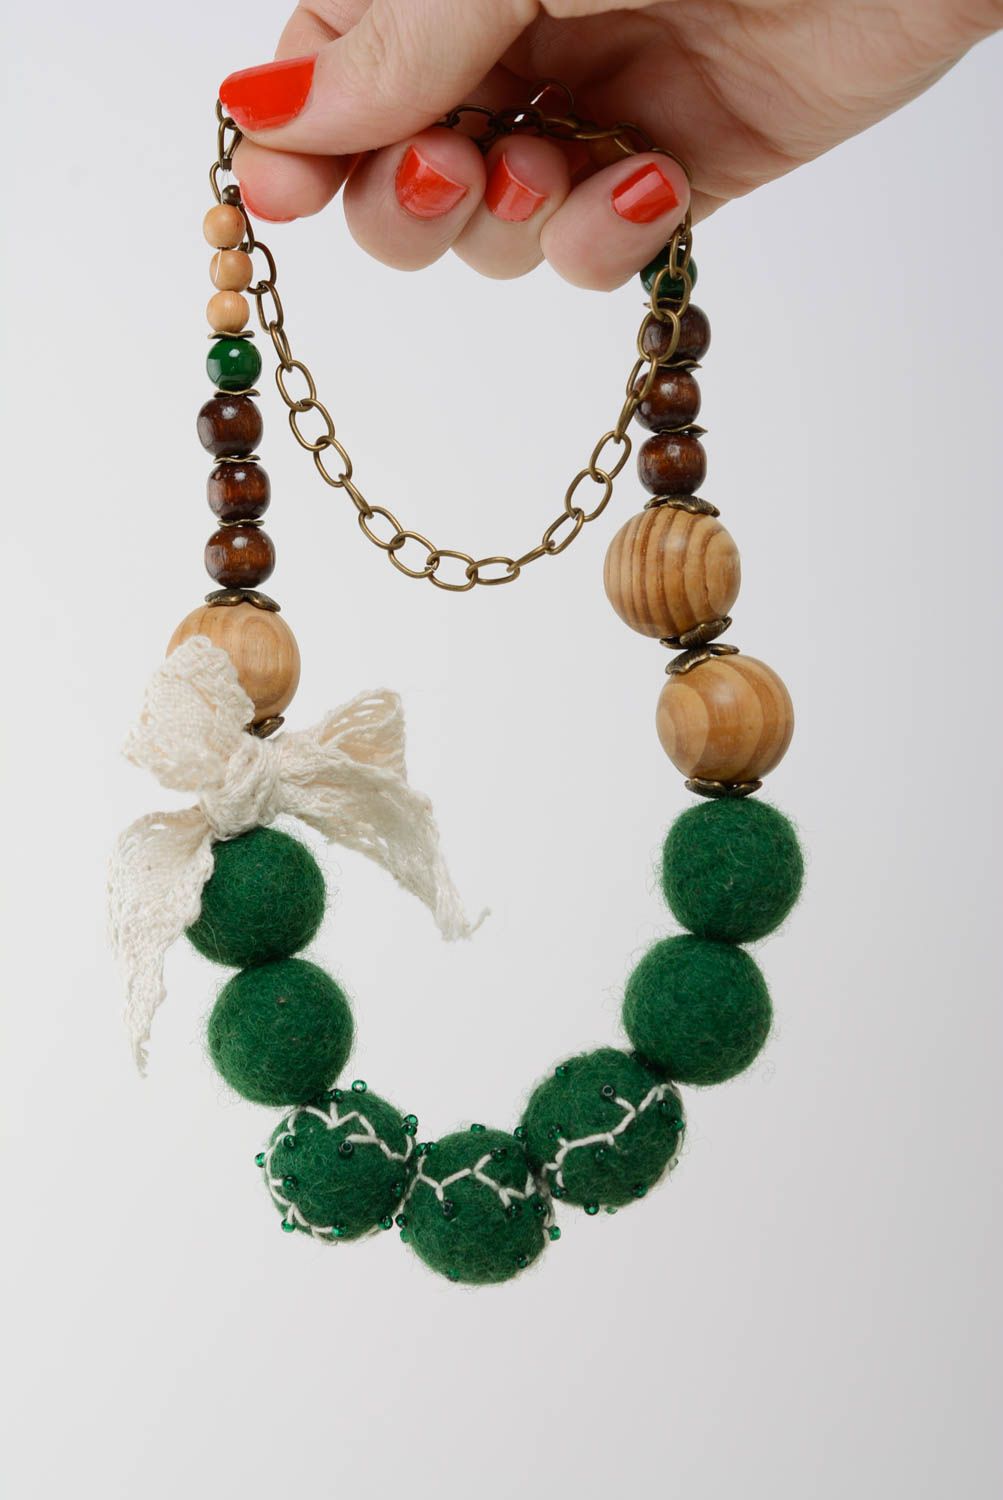 Handmade necklace on chain with green felted wool and wooden beads with lace photo 3